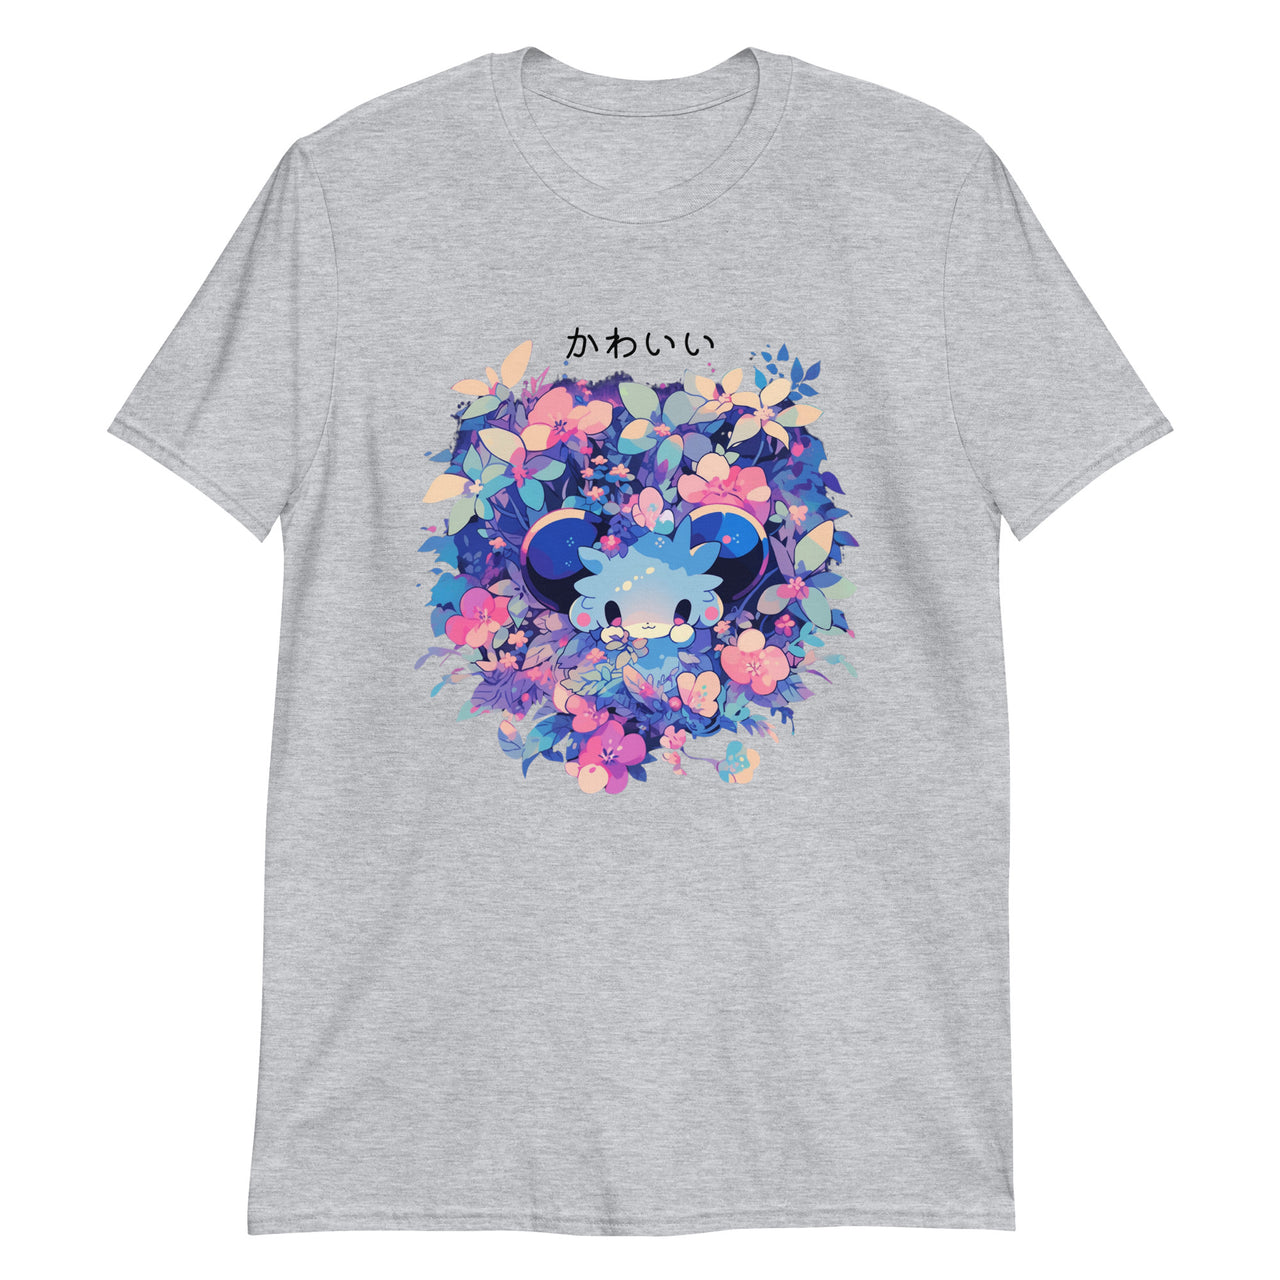 Kawaii Anime Mouse in Colorful Flowers T-Shirt